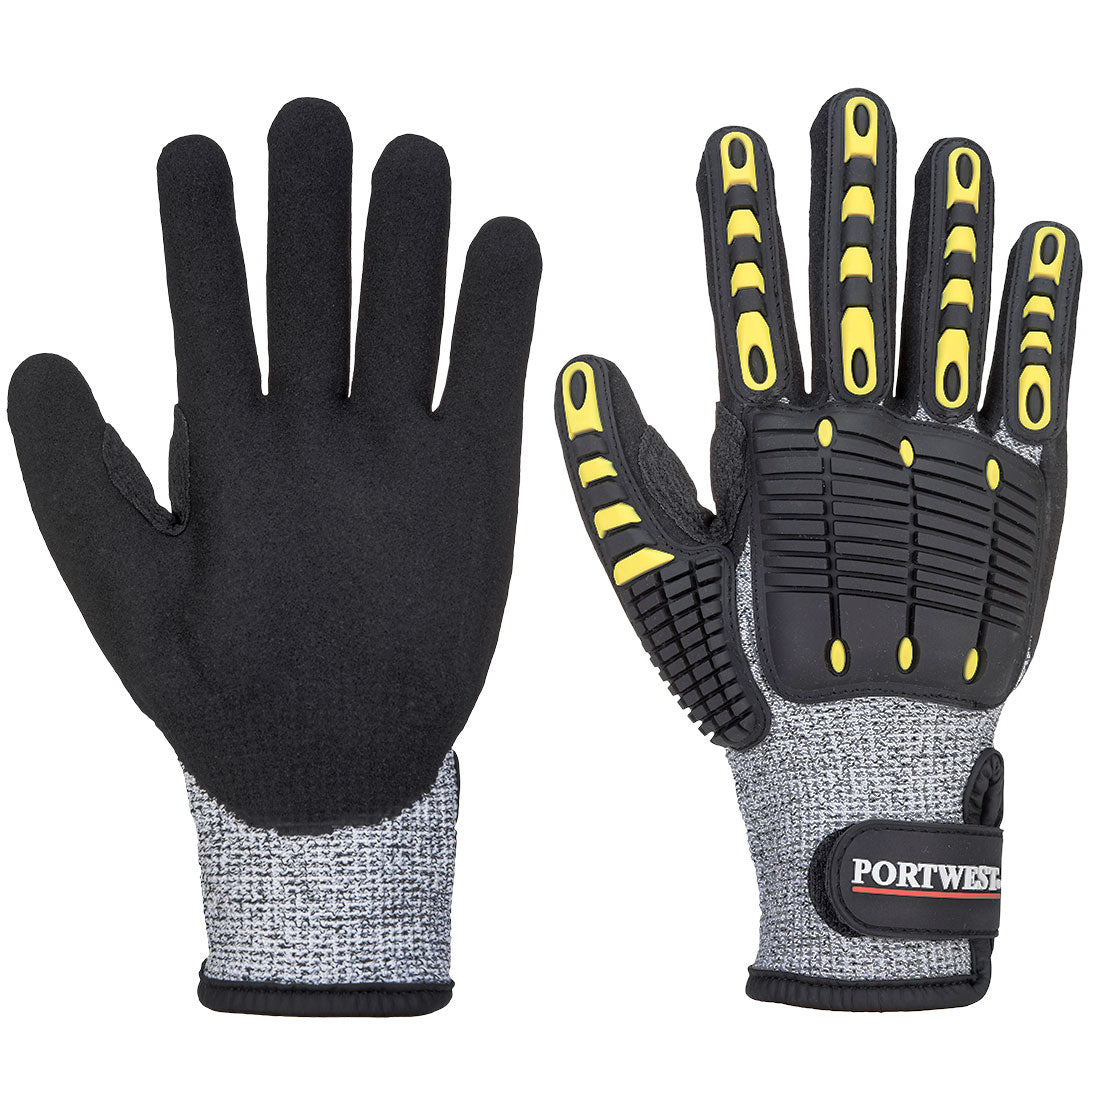 Portwest Anti Impact and Cut Resistant Gloves - A722